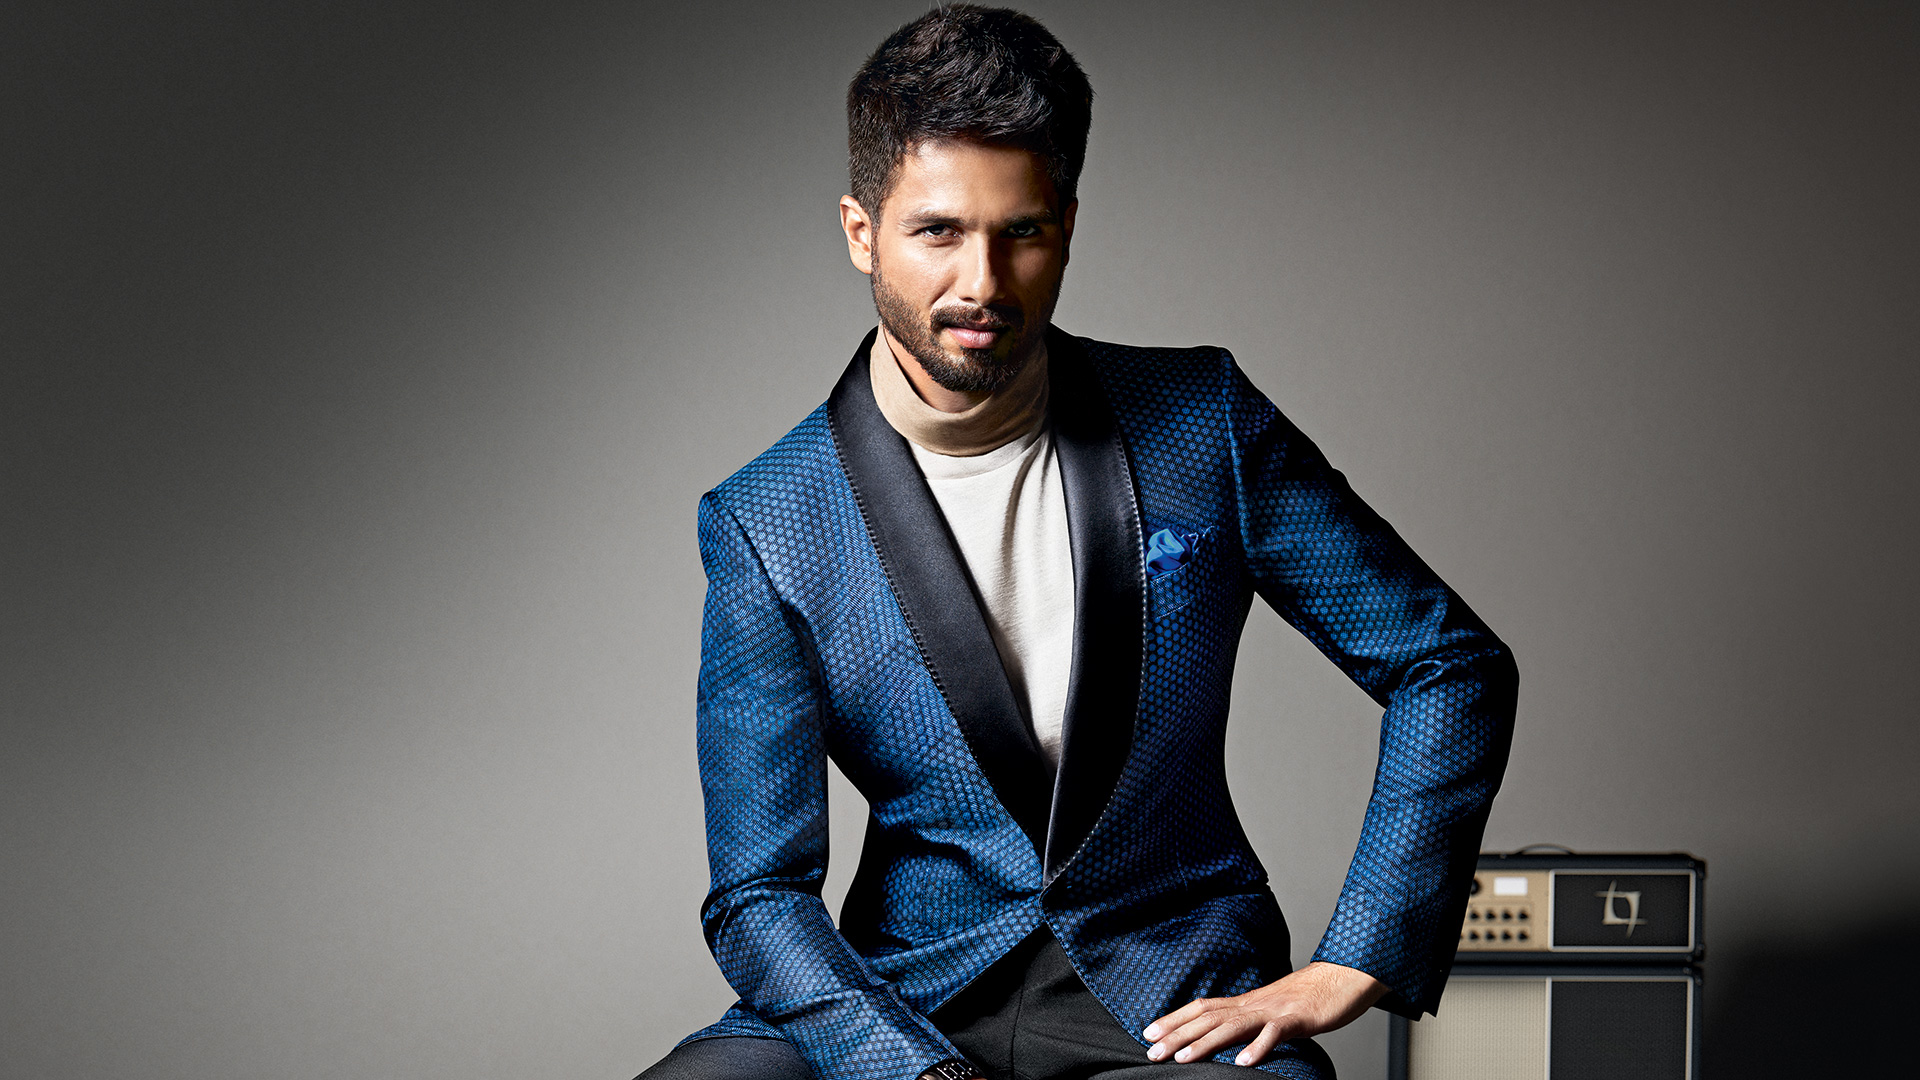 Shahid Kapoor Wallpaper with Black Background | HD Wallpapers